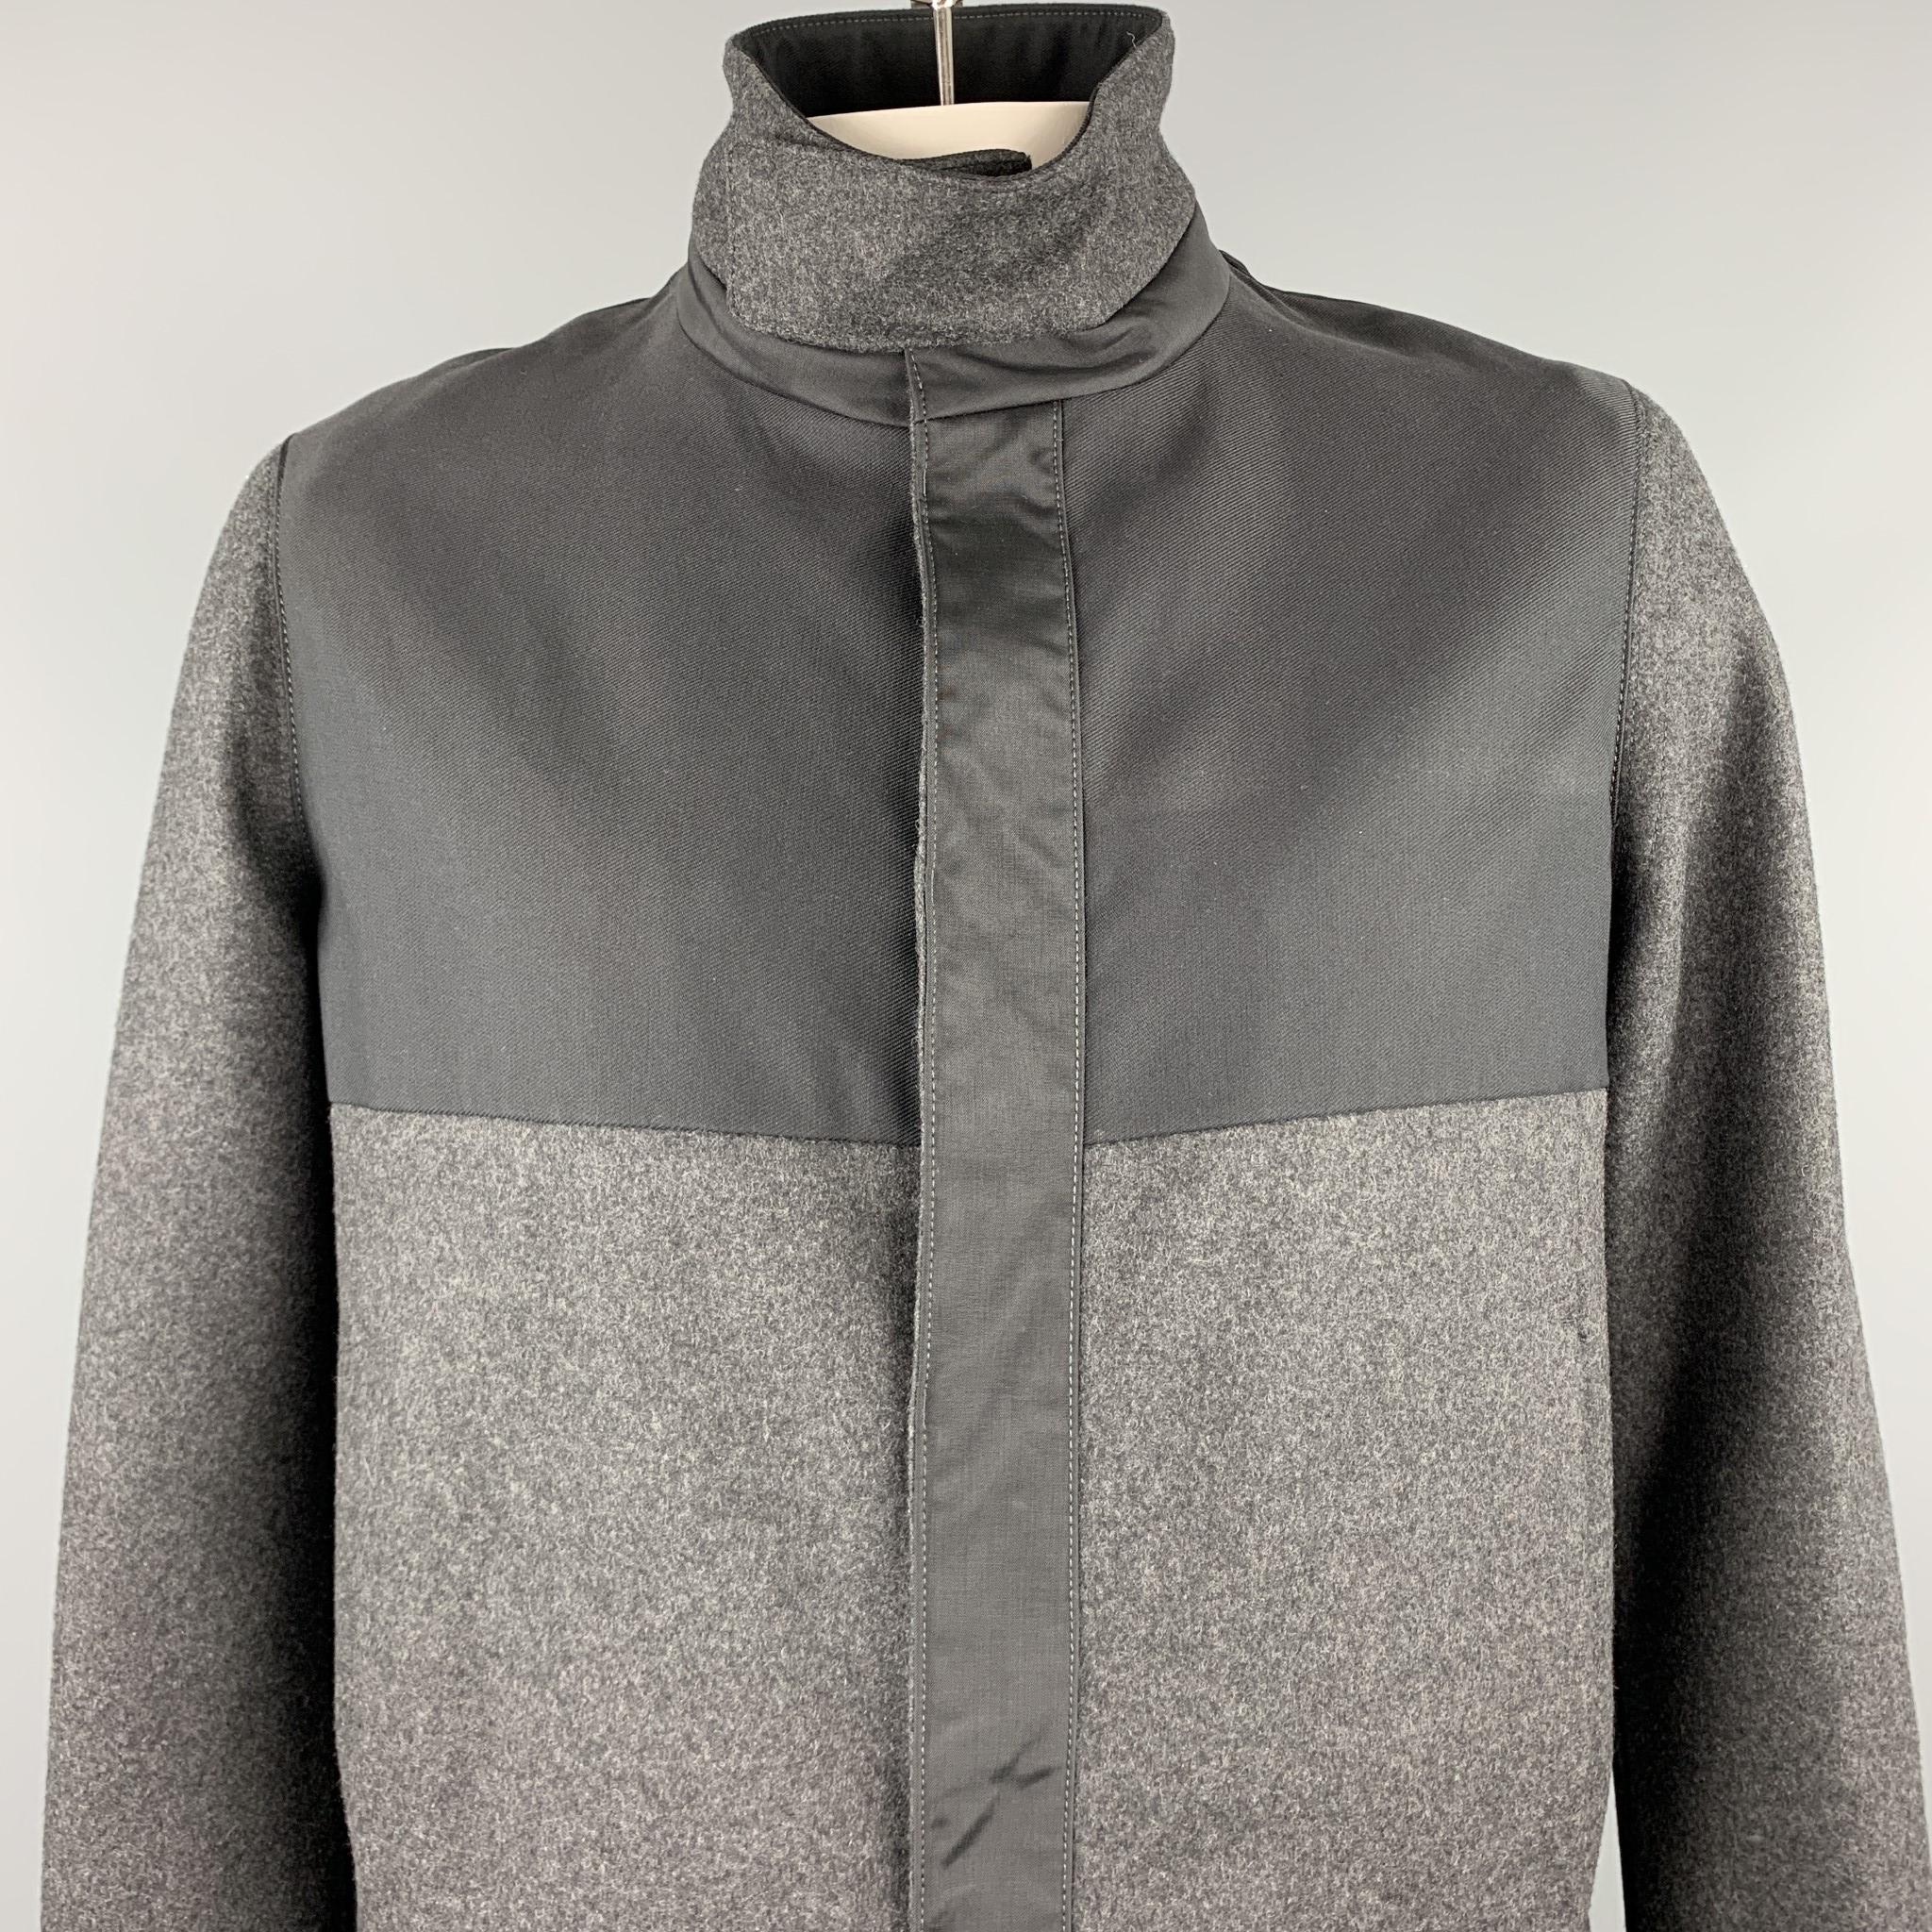 VALENTINO jacket comes in a charcoal & black mixed materials featuring a high collar, slit pockets, and a zip & snap button closure. Made in Italy.

New With Tags.
Marked: IT 54

Measurements:

Shoulder: 18.5 in. 
Chest: 44 in. 
Sleeve: 28 in.